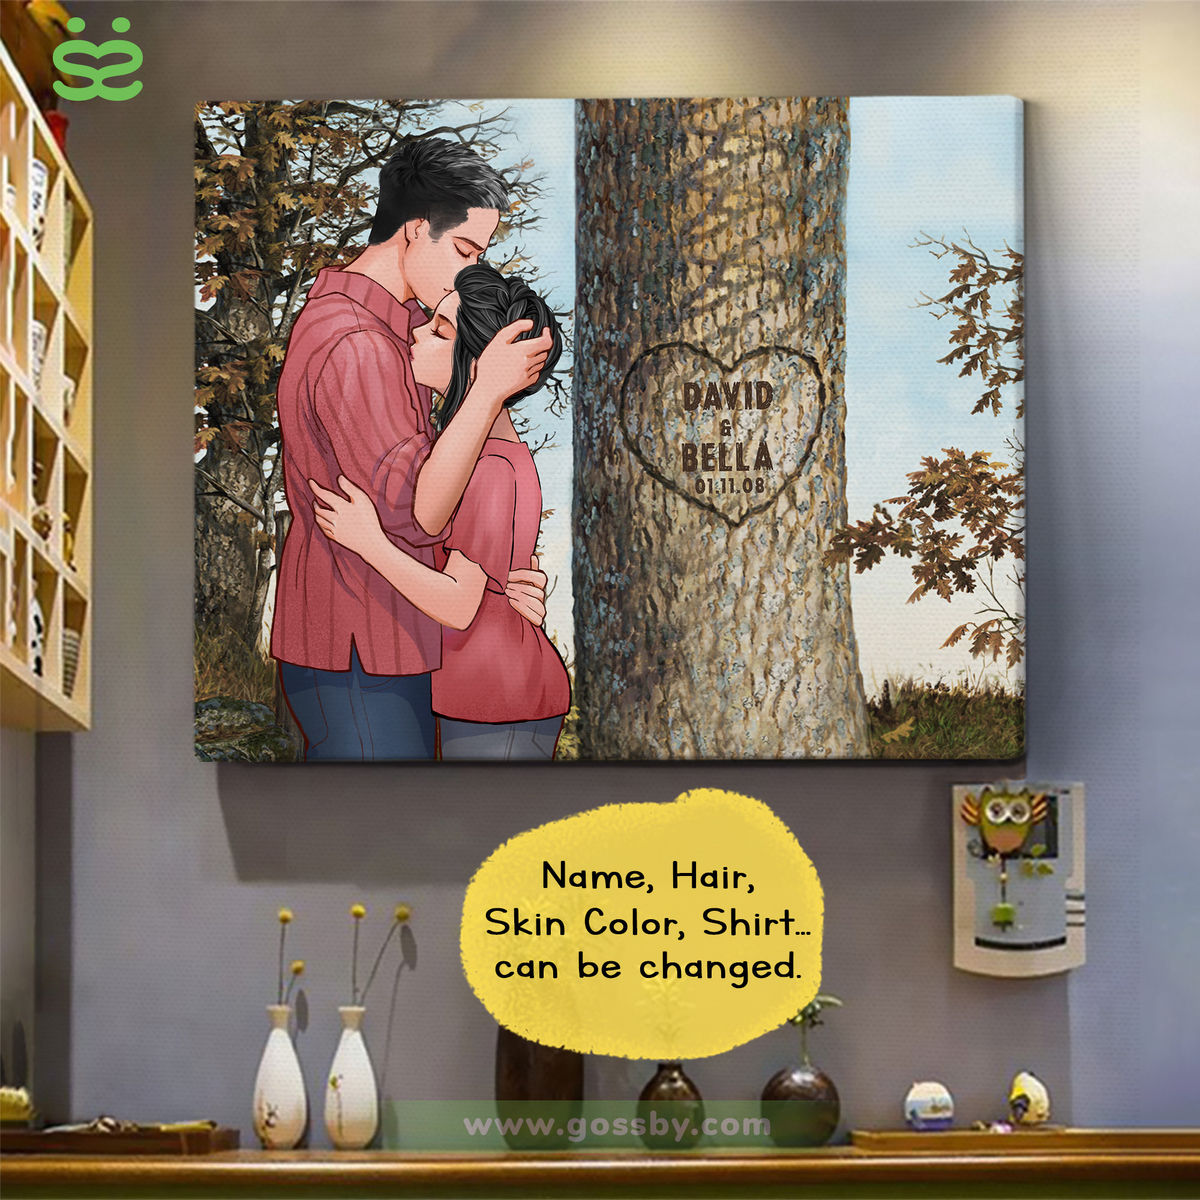 Personalized Wrapped Canvas - Couple - Heart Carved Tree (10729)